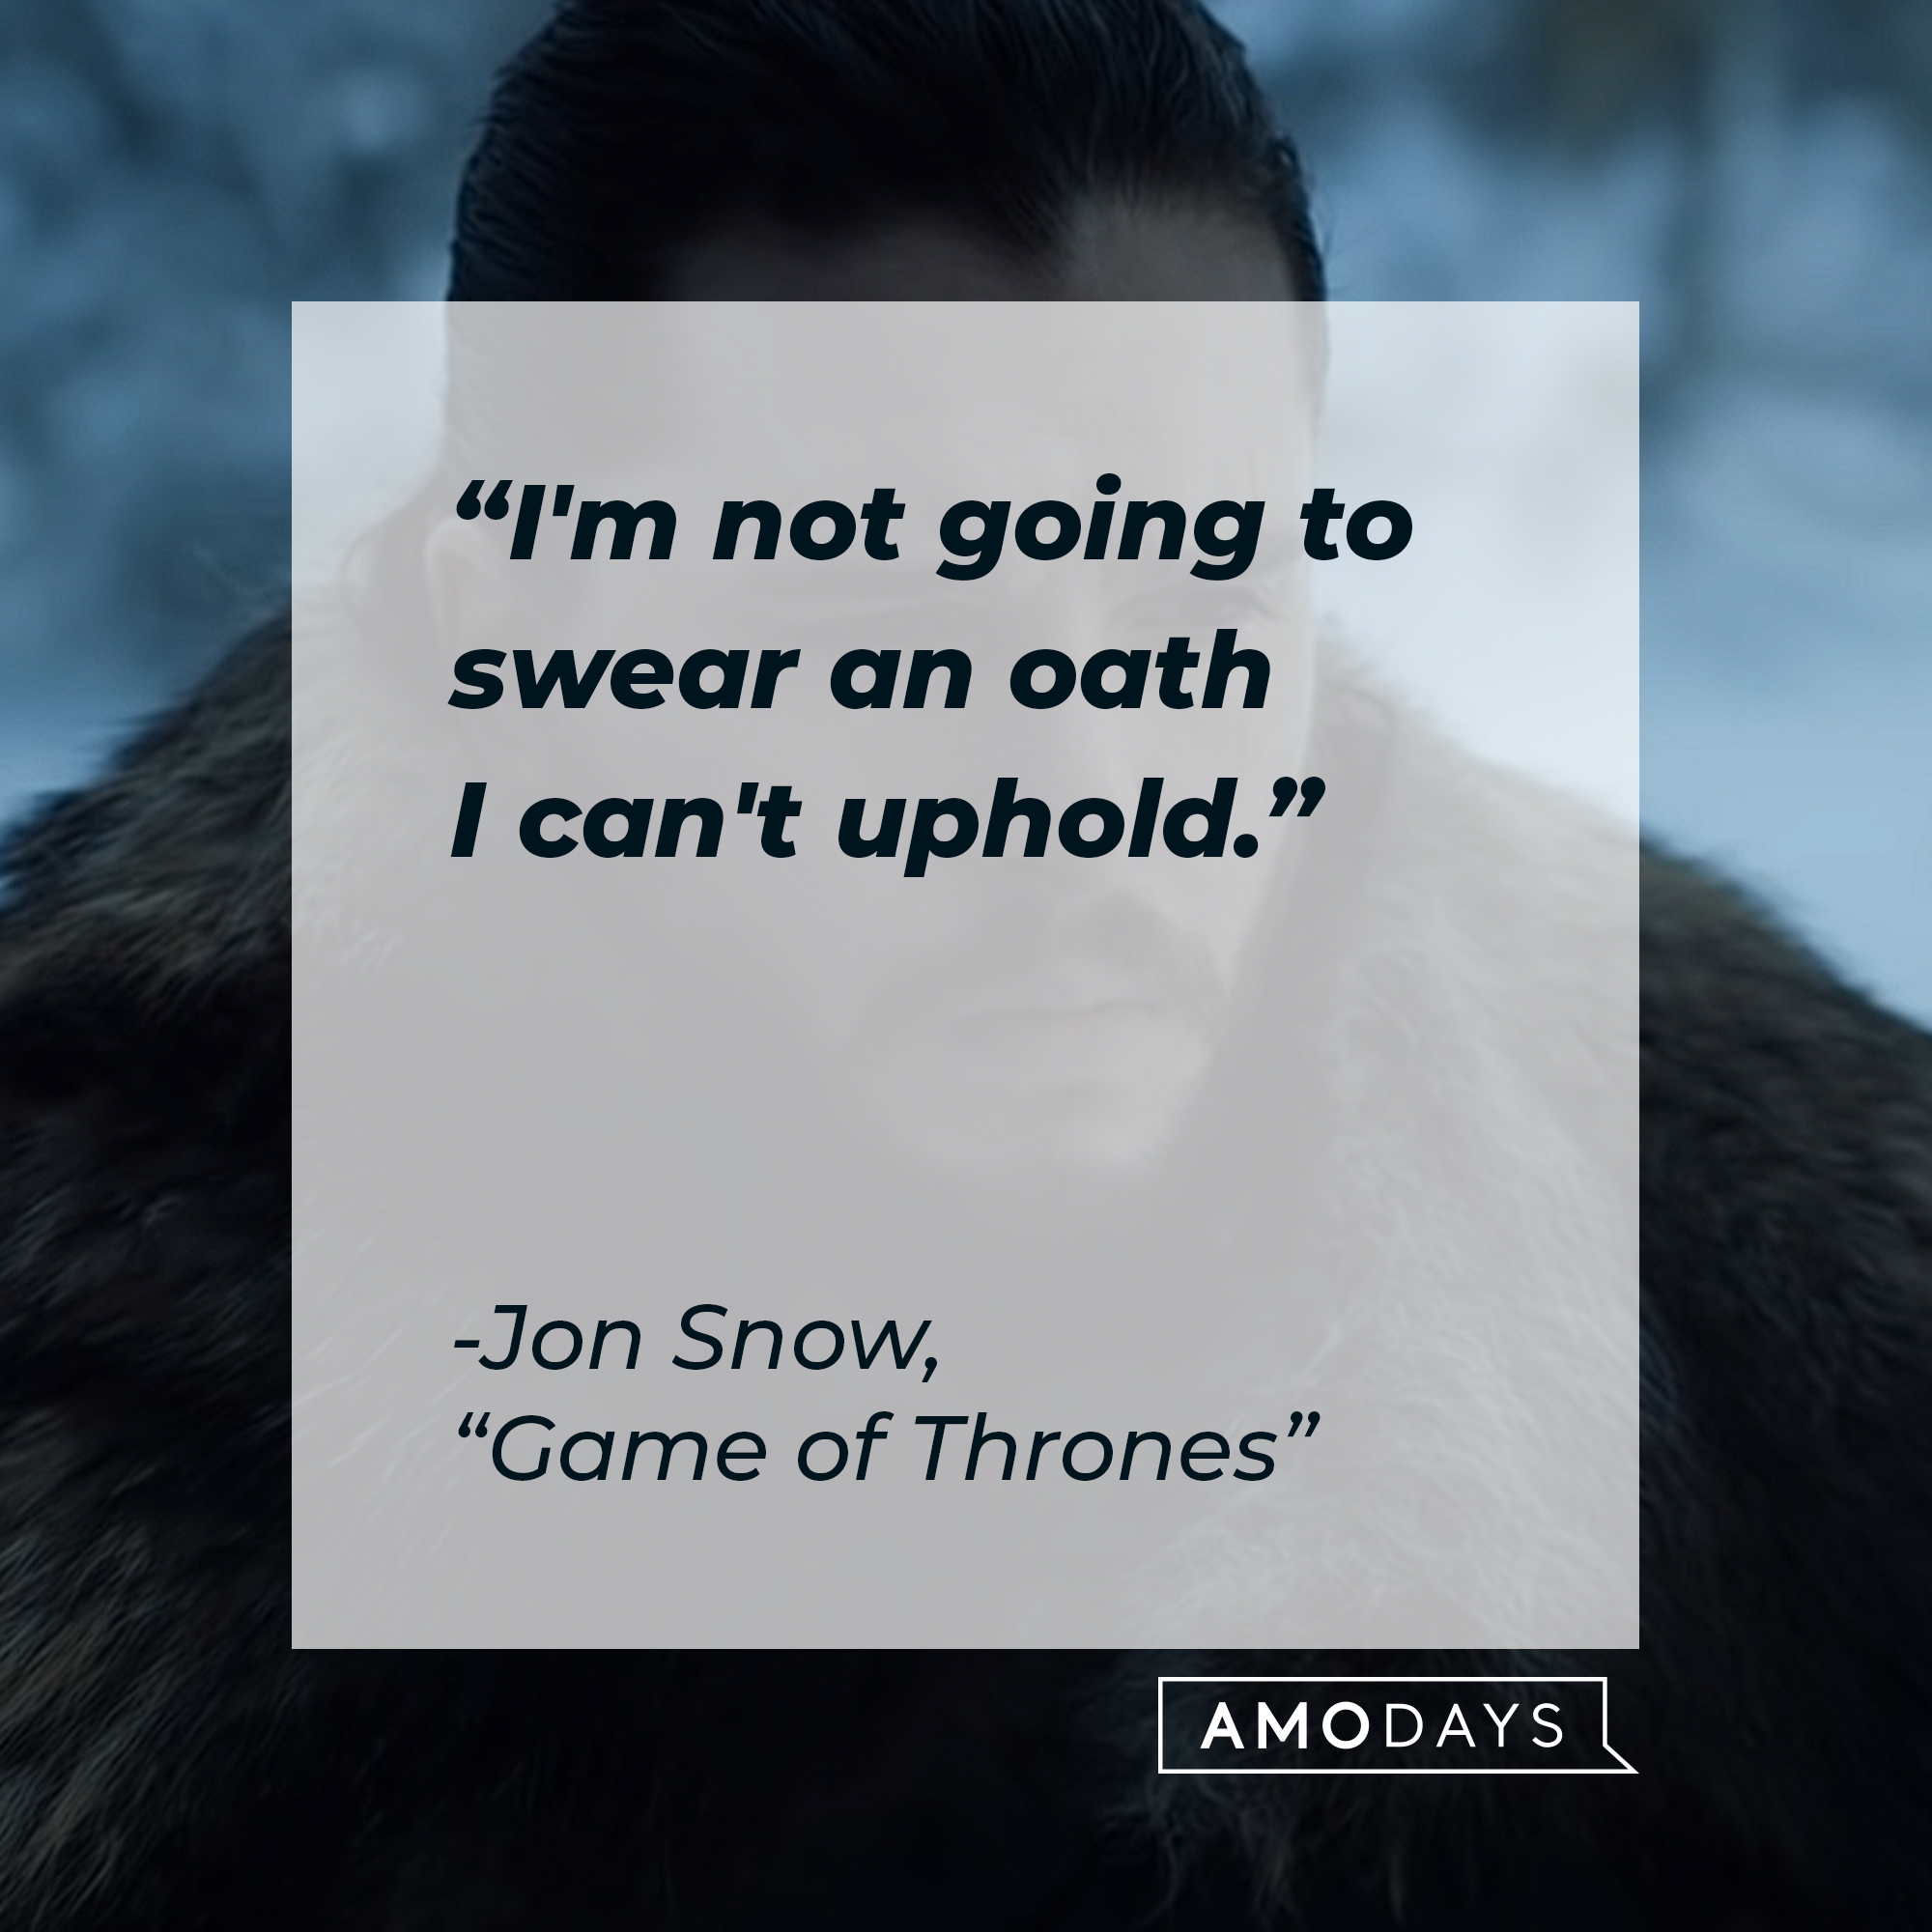 A photo of Jon Snow with the quote, "I'm not going to swear an oath I can't uphold." | Source: YouTube/gameofthrones